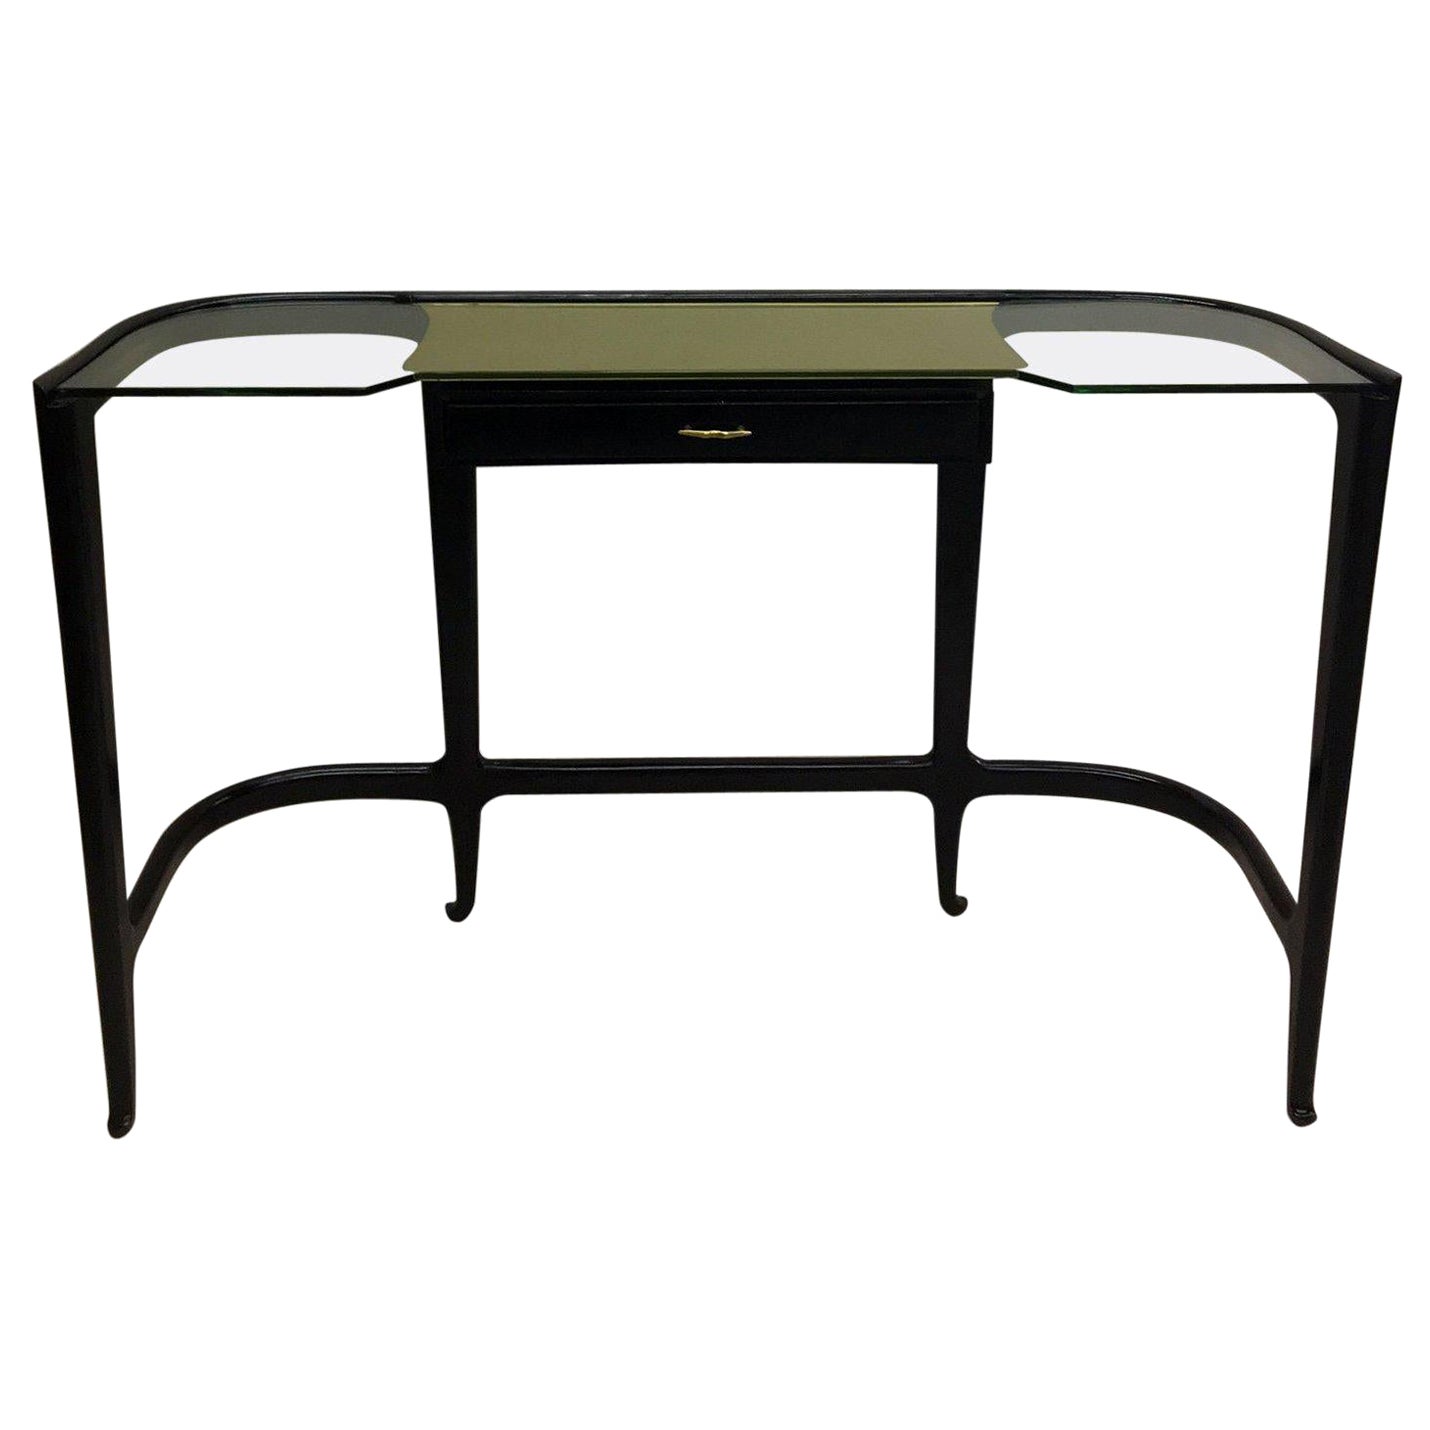 Large Italian Modern Neoclassical Carved Wood & Glass Console, Attr to G. Ulrich For Sale